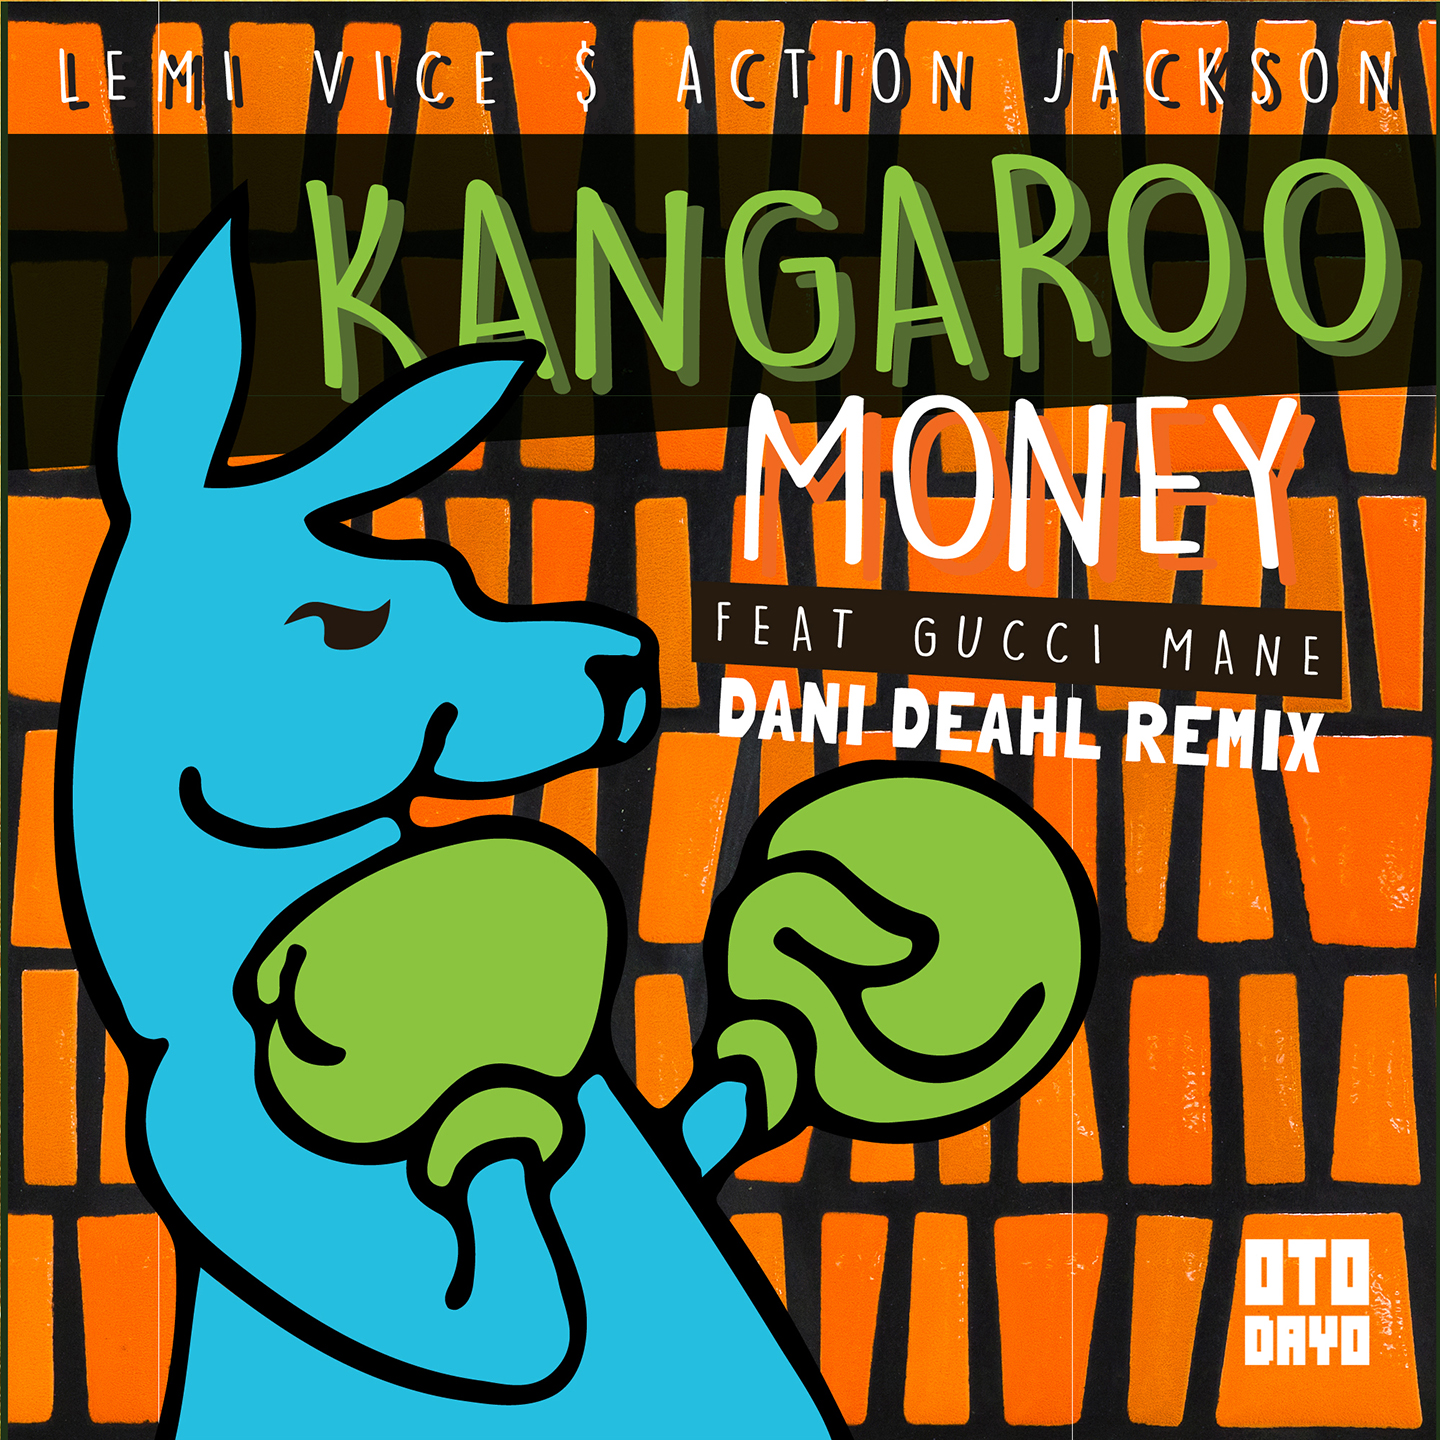 Dani Deahl’s Latest Remix “Kangaroo Money” Packs a Mean Punch [Free Download]